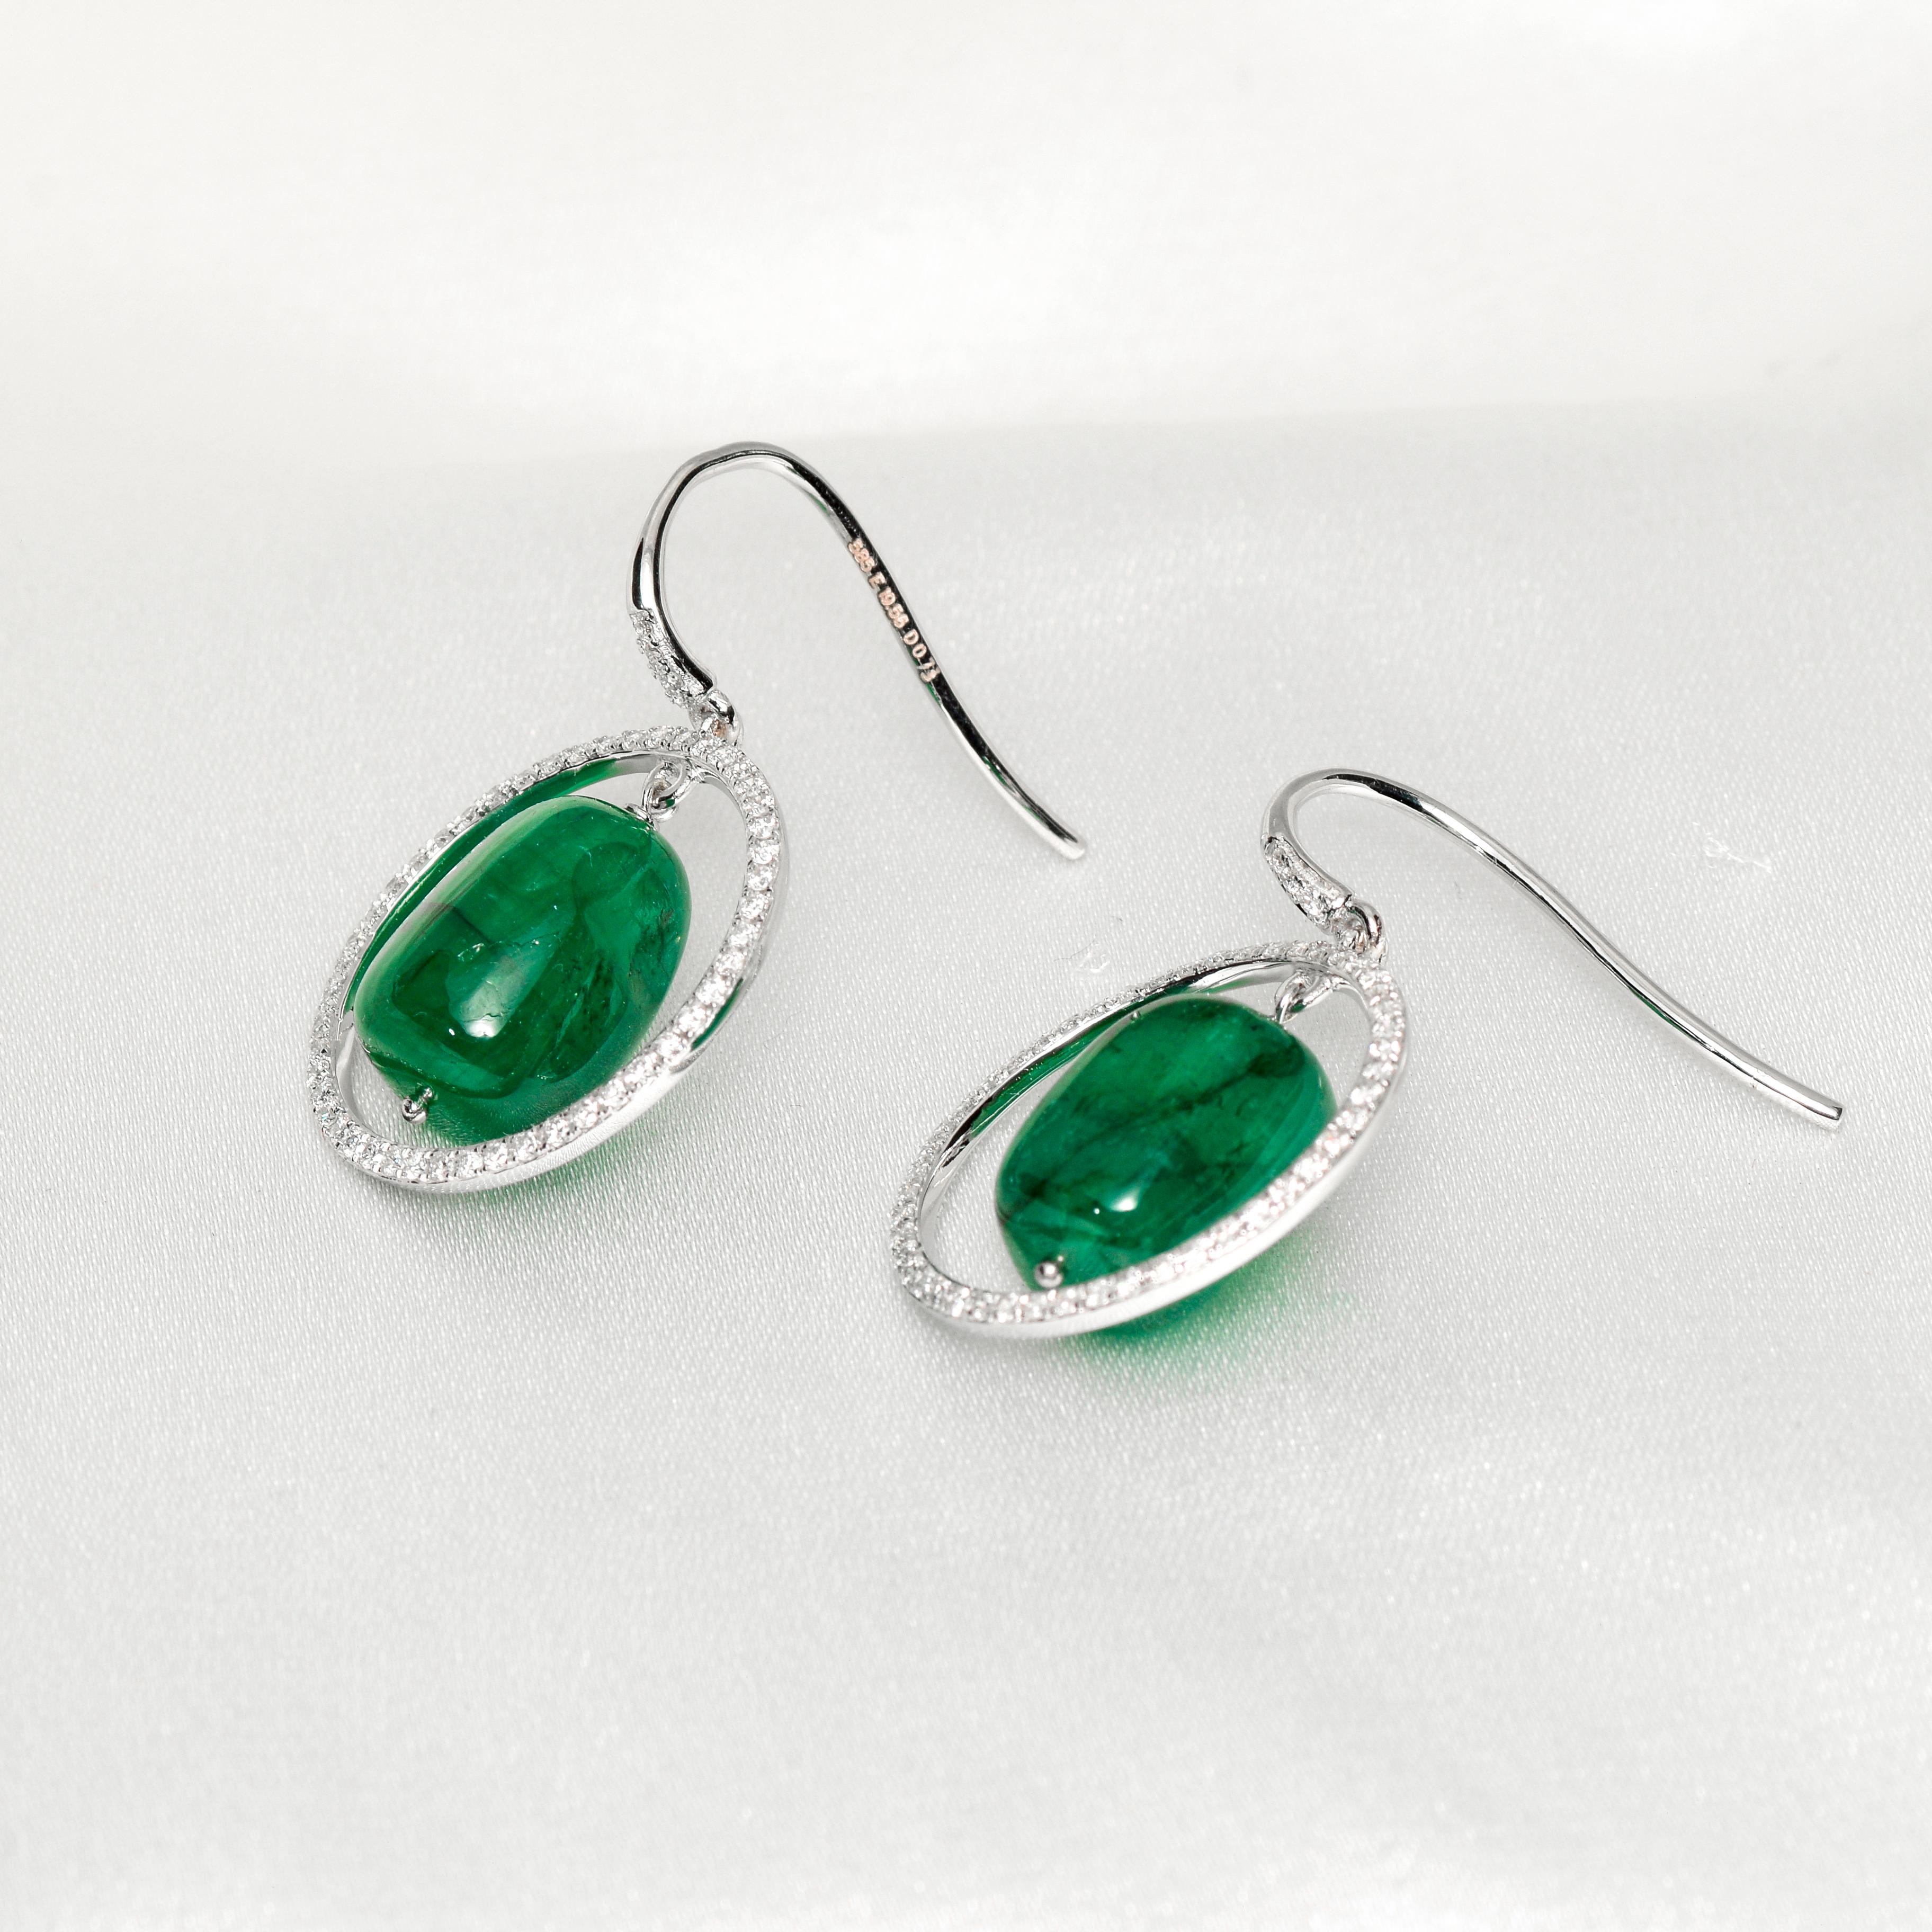 IGI 14k 19.56ct Emerald & Diamonds Antique Art Deco Style Hook Earrings In New Condition For Sale In Kaohsiung City, TW